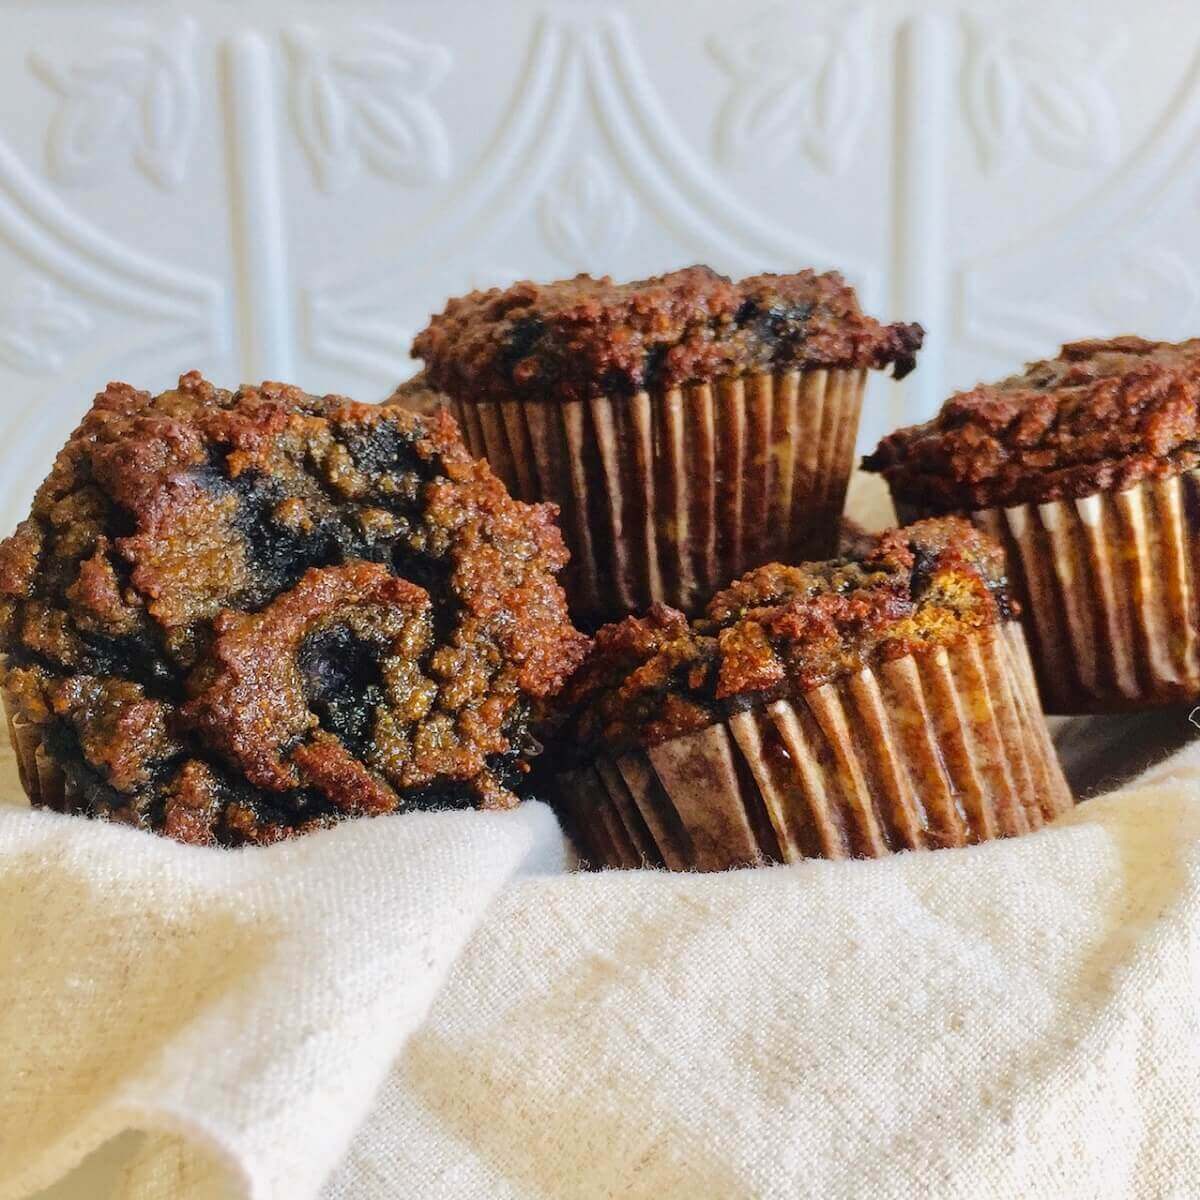 A basket filled with paleo blueberry banana muffins against a white tile background.